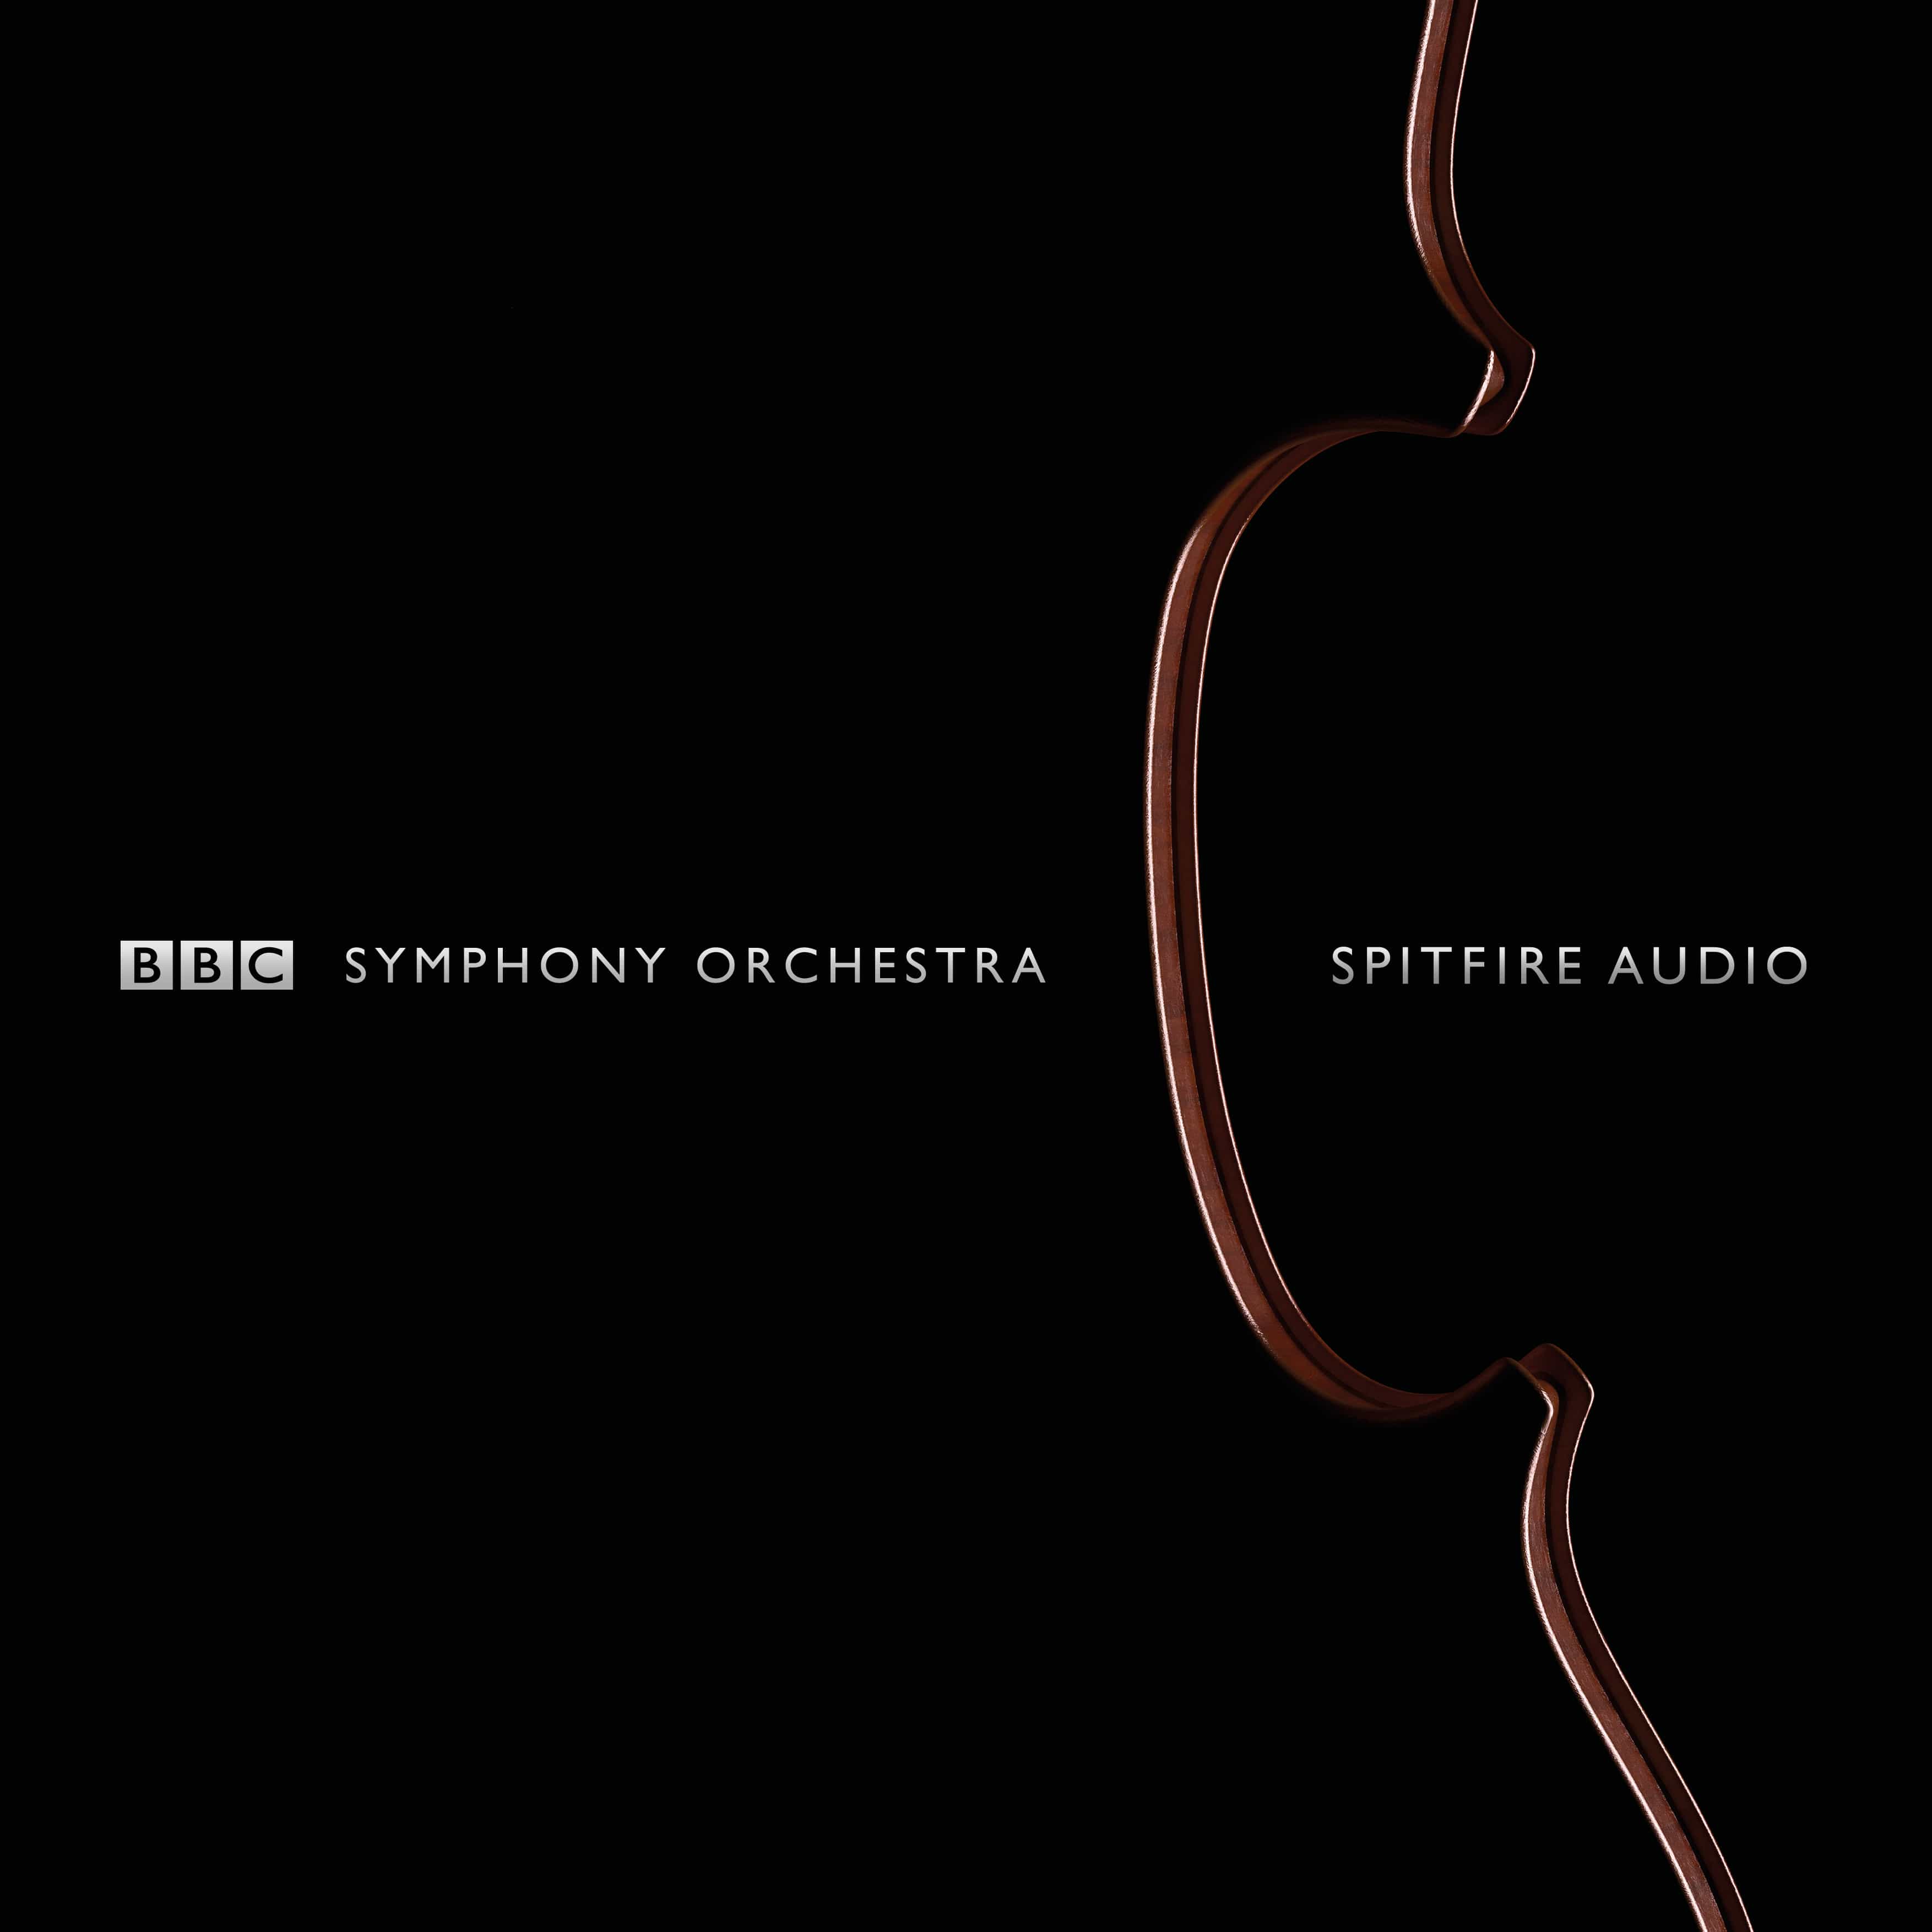 Review of Spitfire Audio BBC Symphony Orchestra